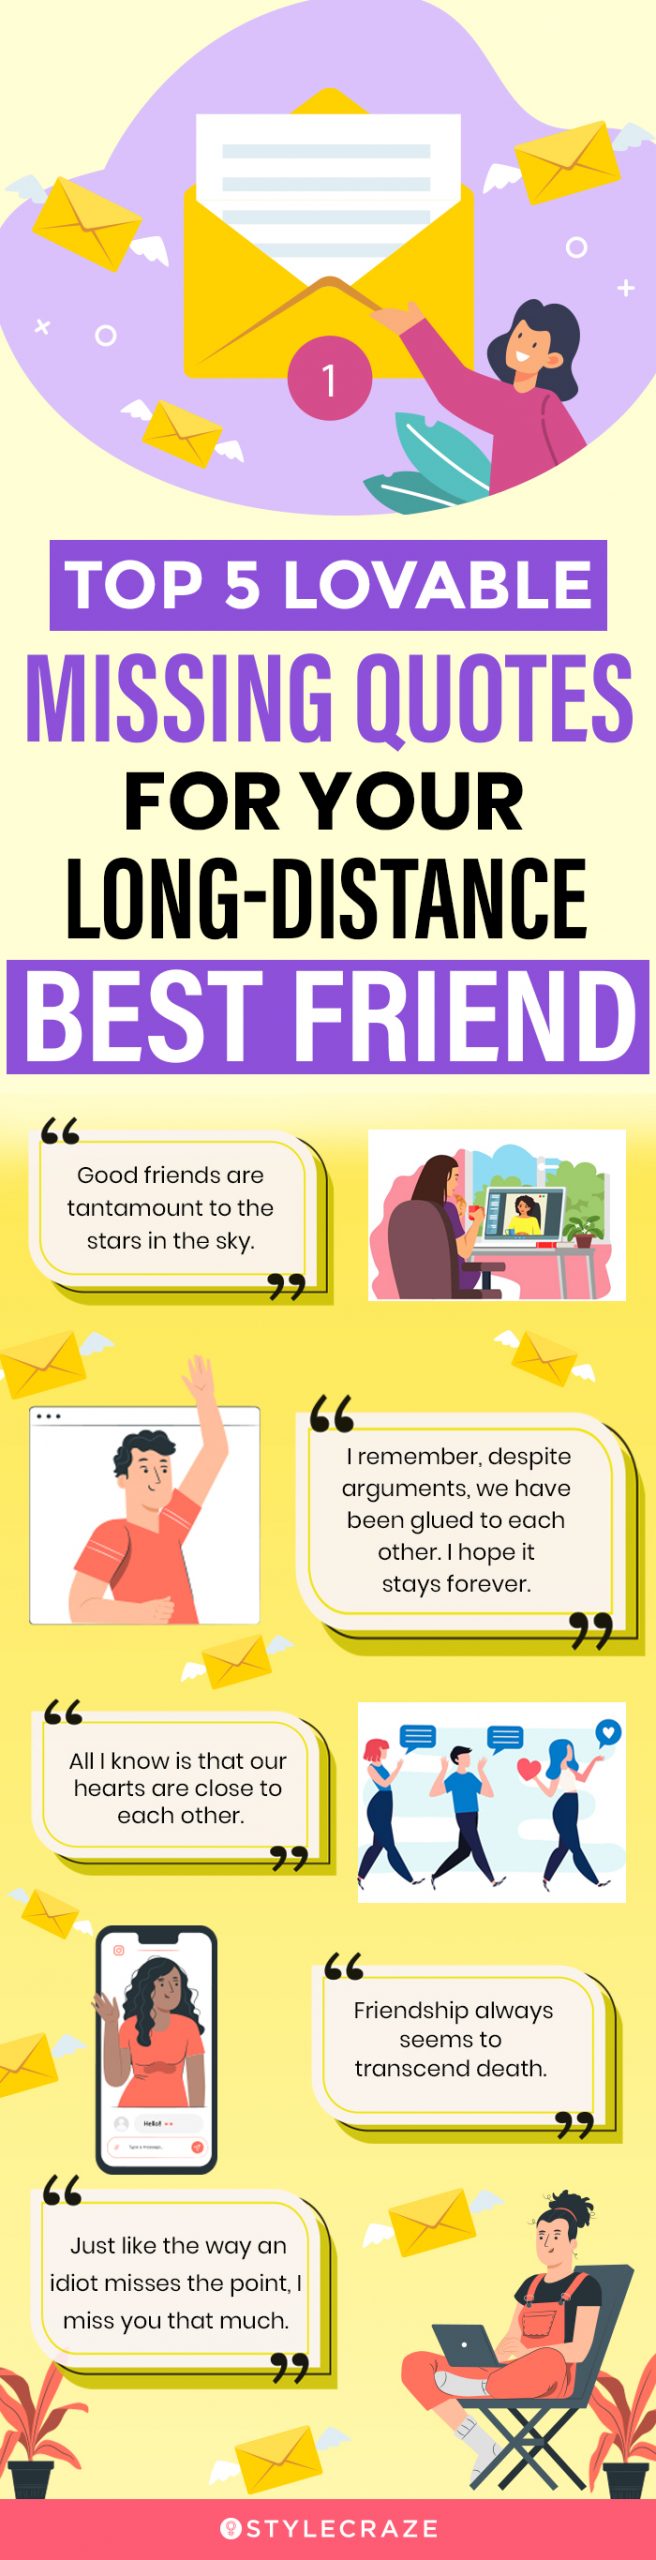 top 5 lovable missing quotes for your long distance best friend [infographic]